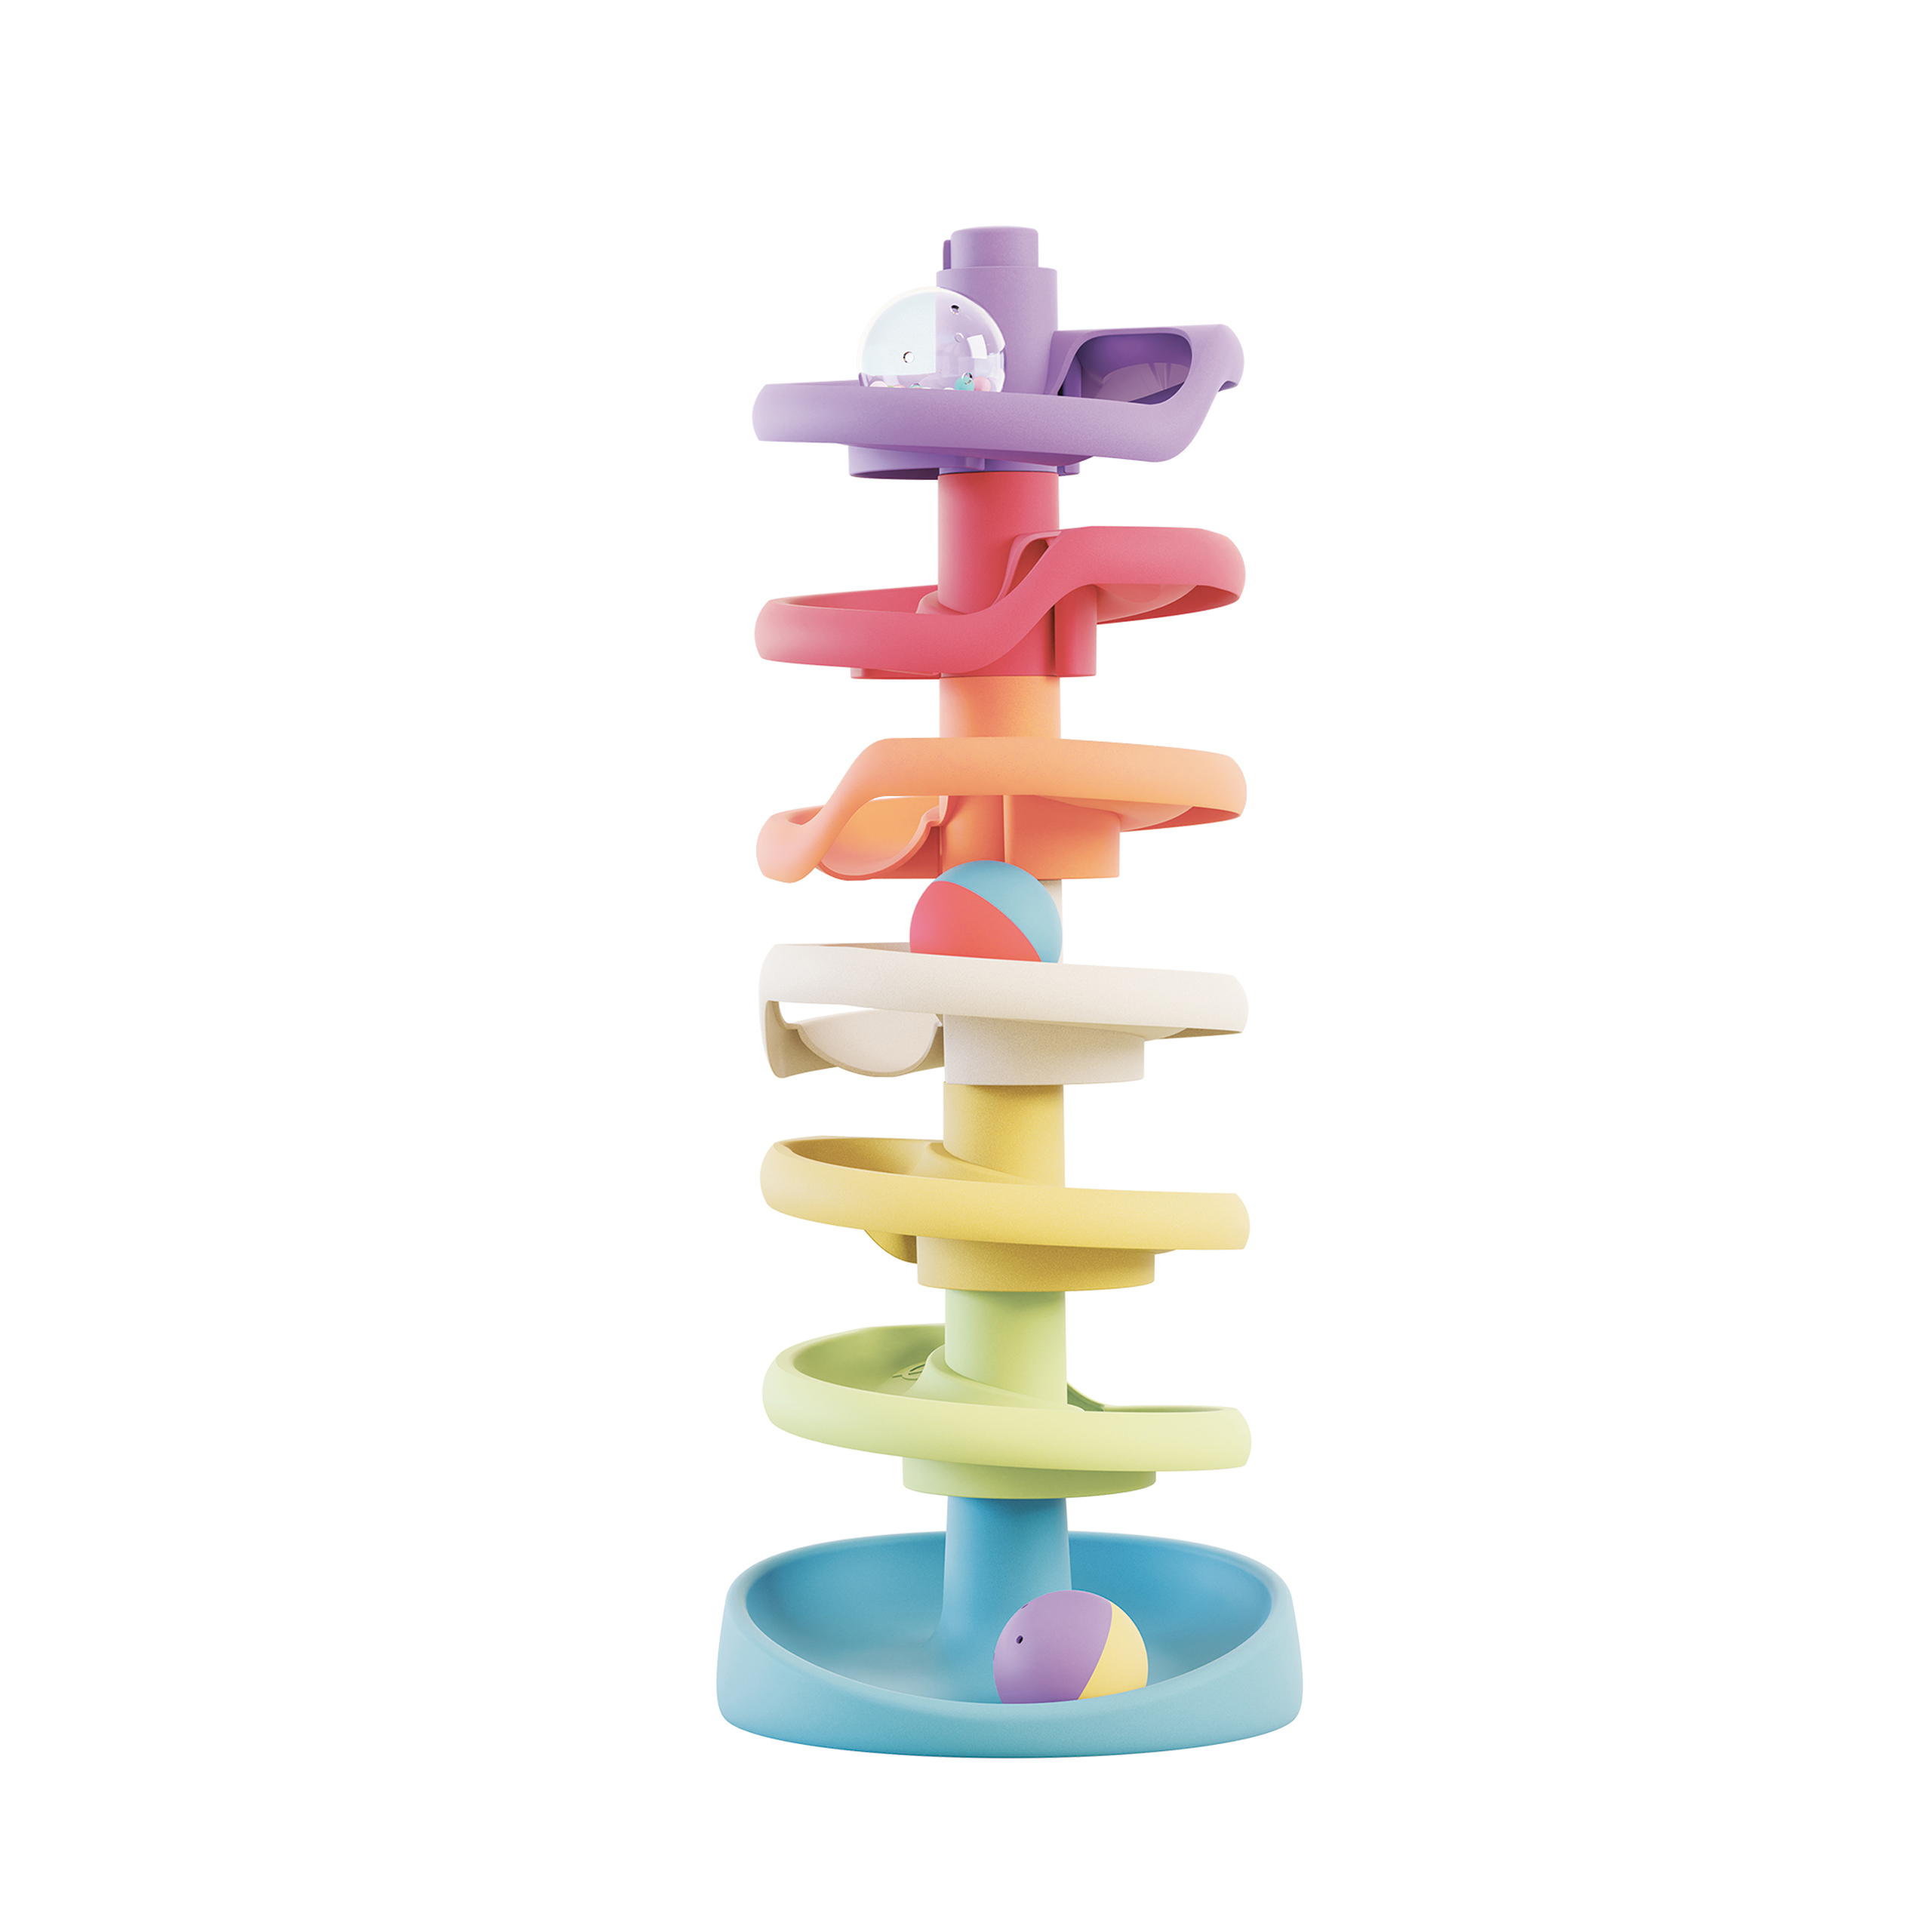 Construction toys quercetti  marble run spiral tower play eco+